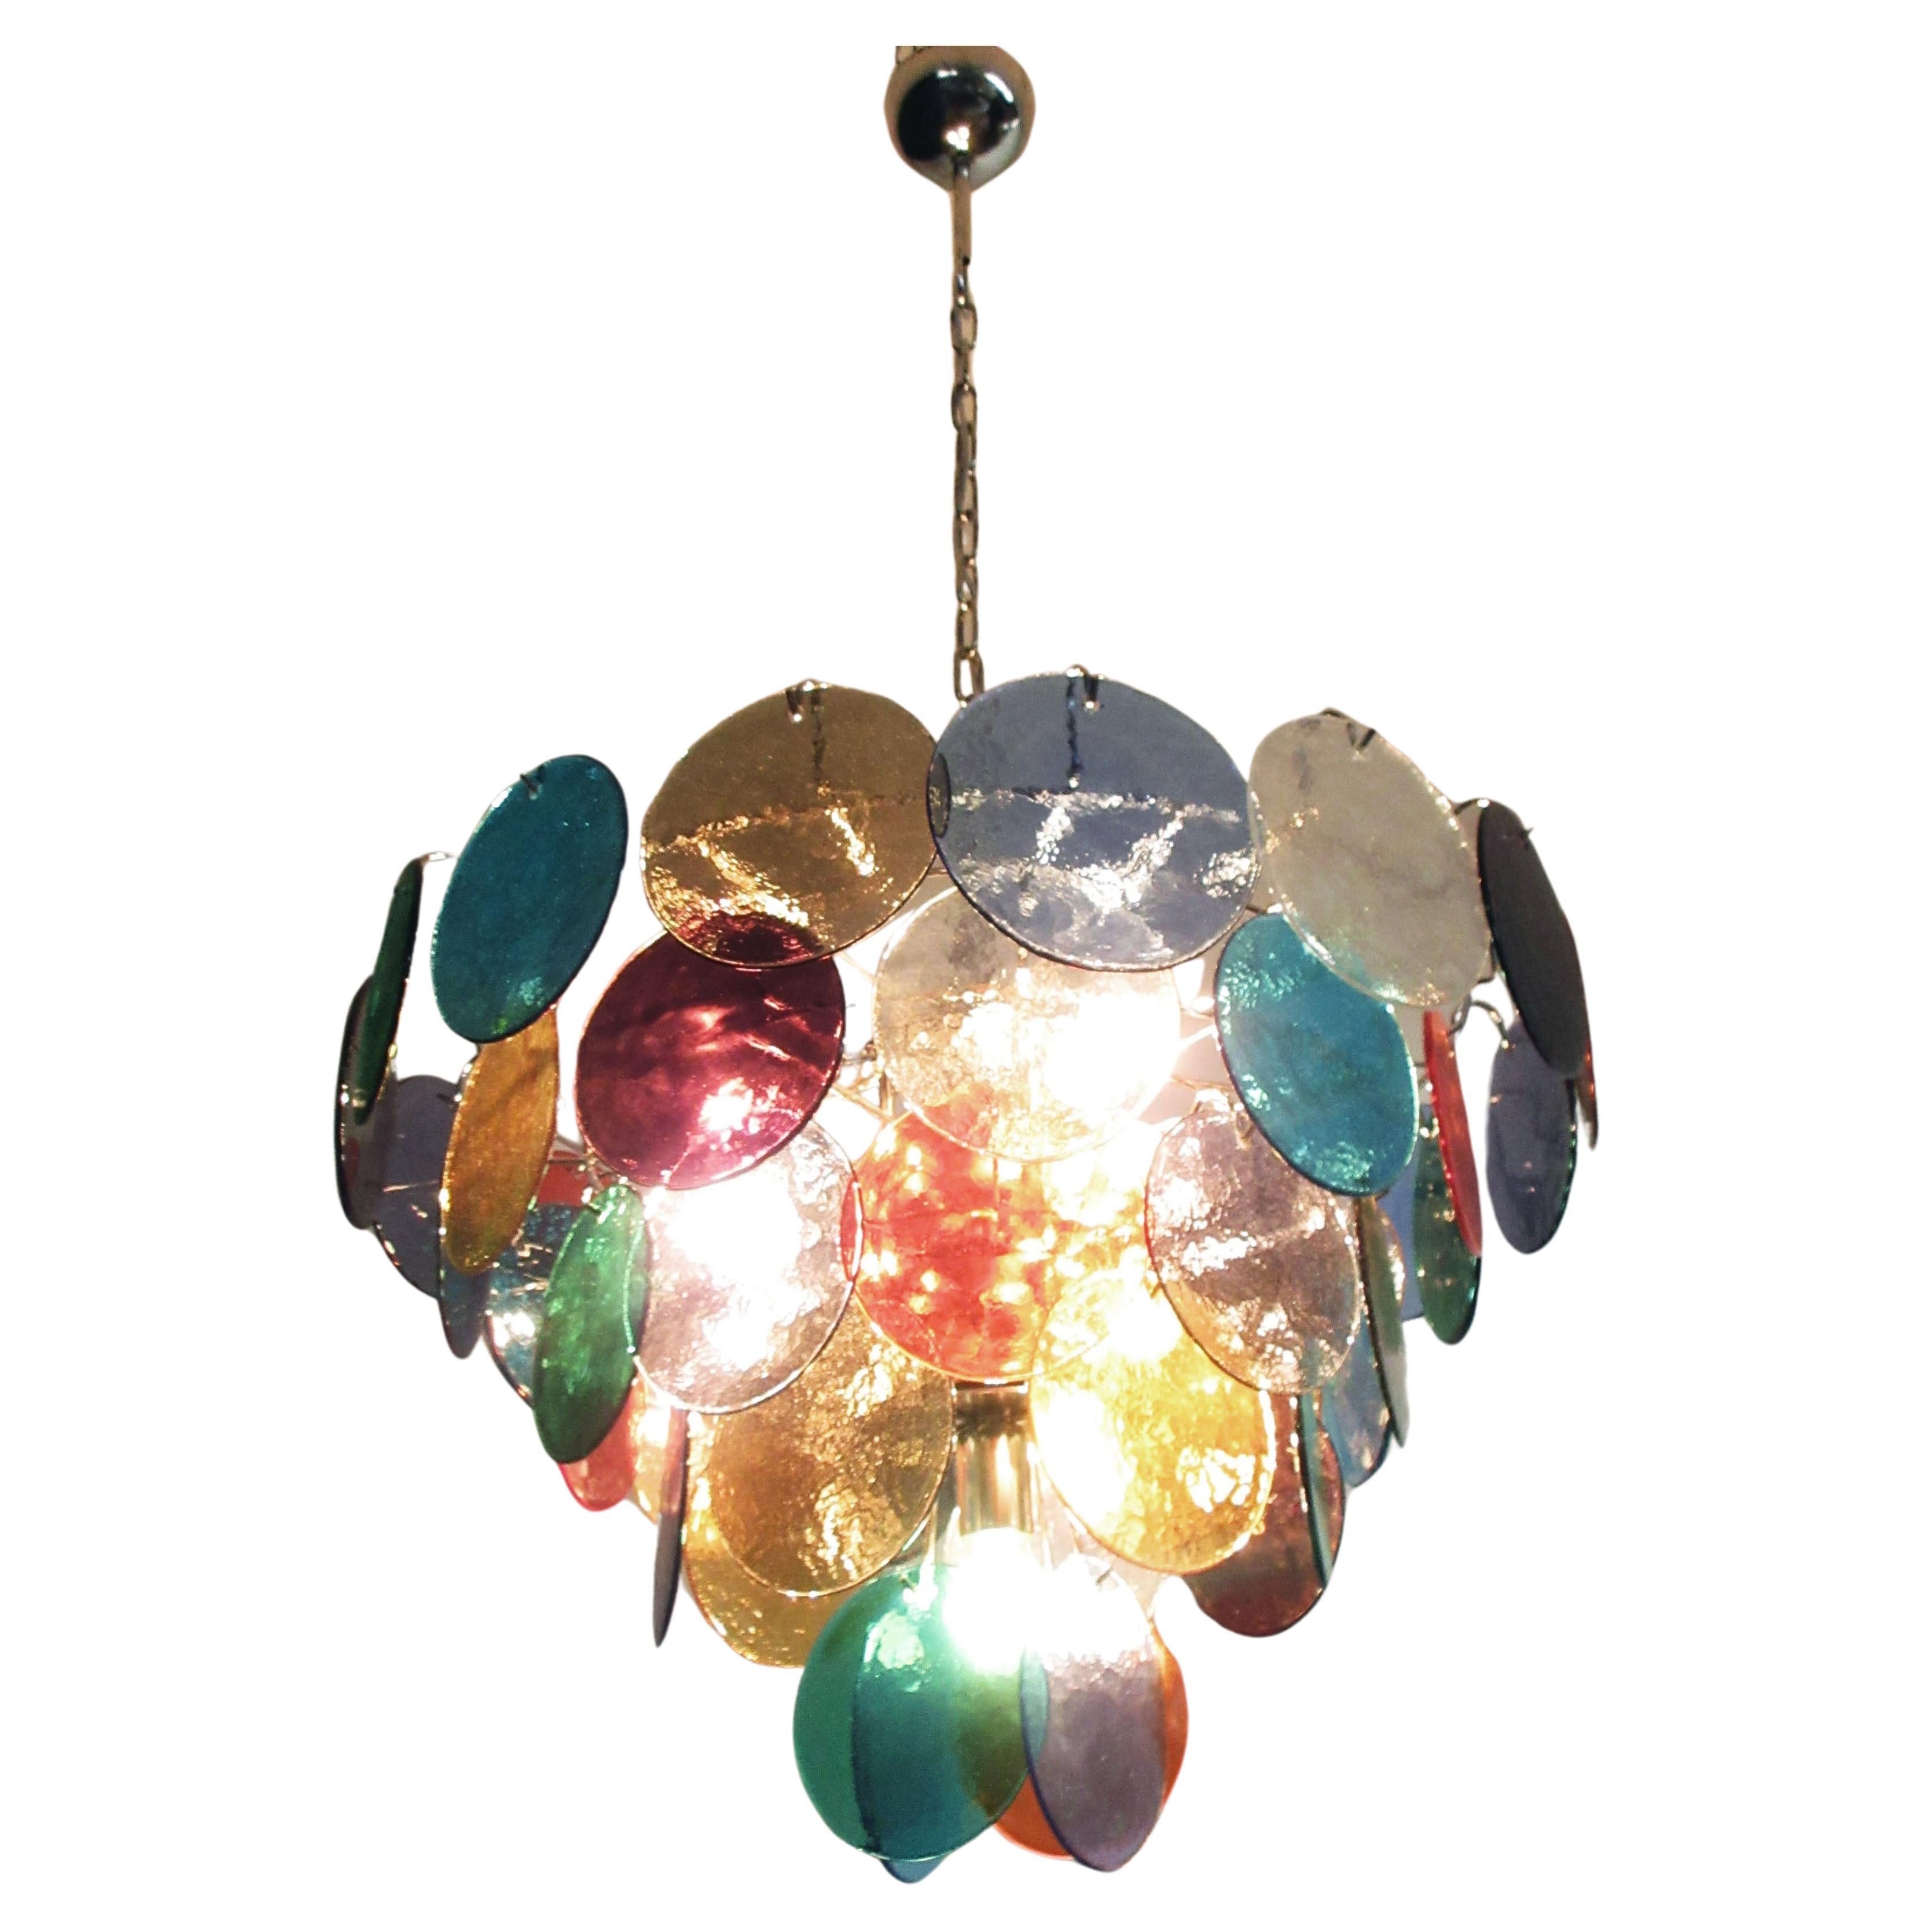  Italian Multicolored Glass Disks Chandelier, Murano In Excellent Condition For Sale In Budapest, HU